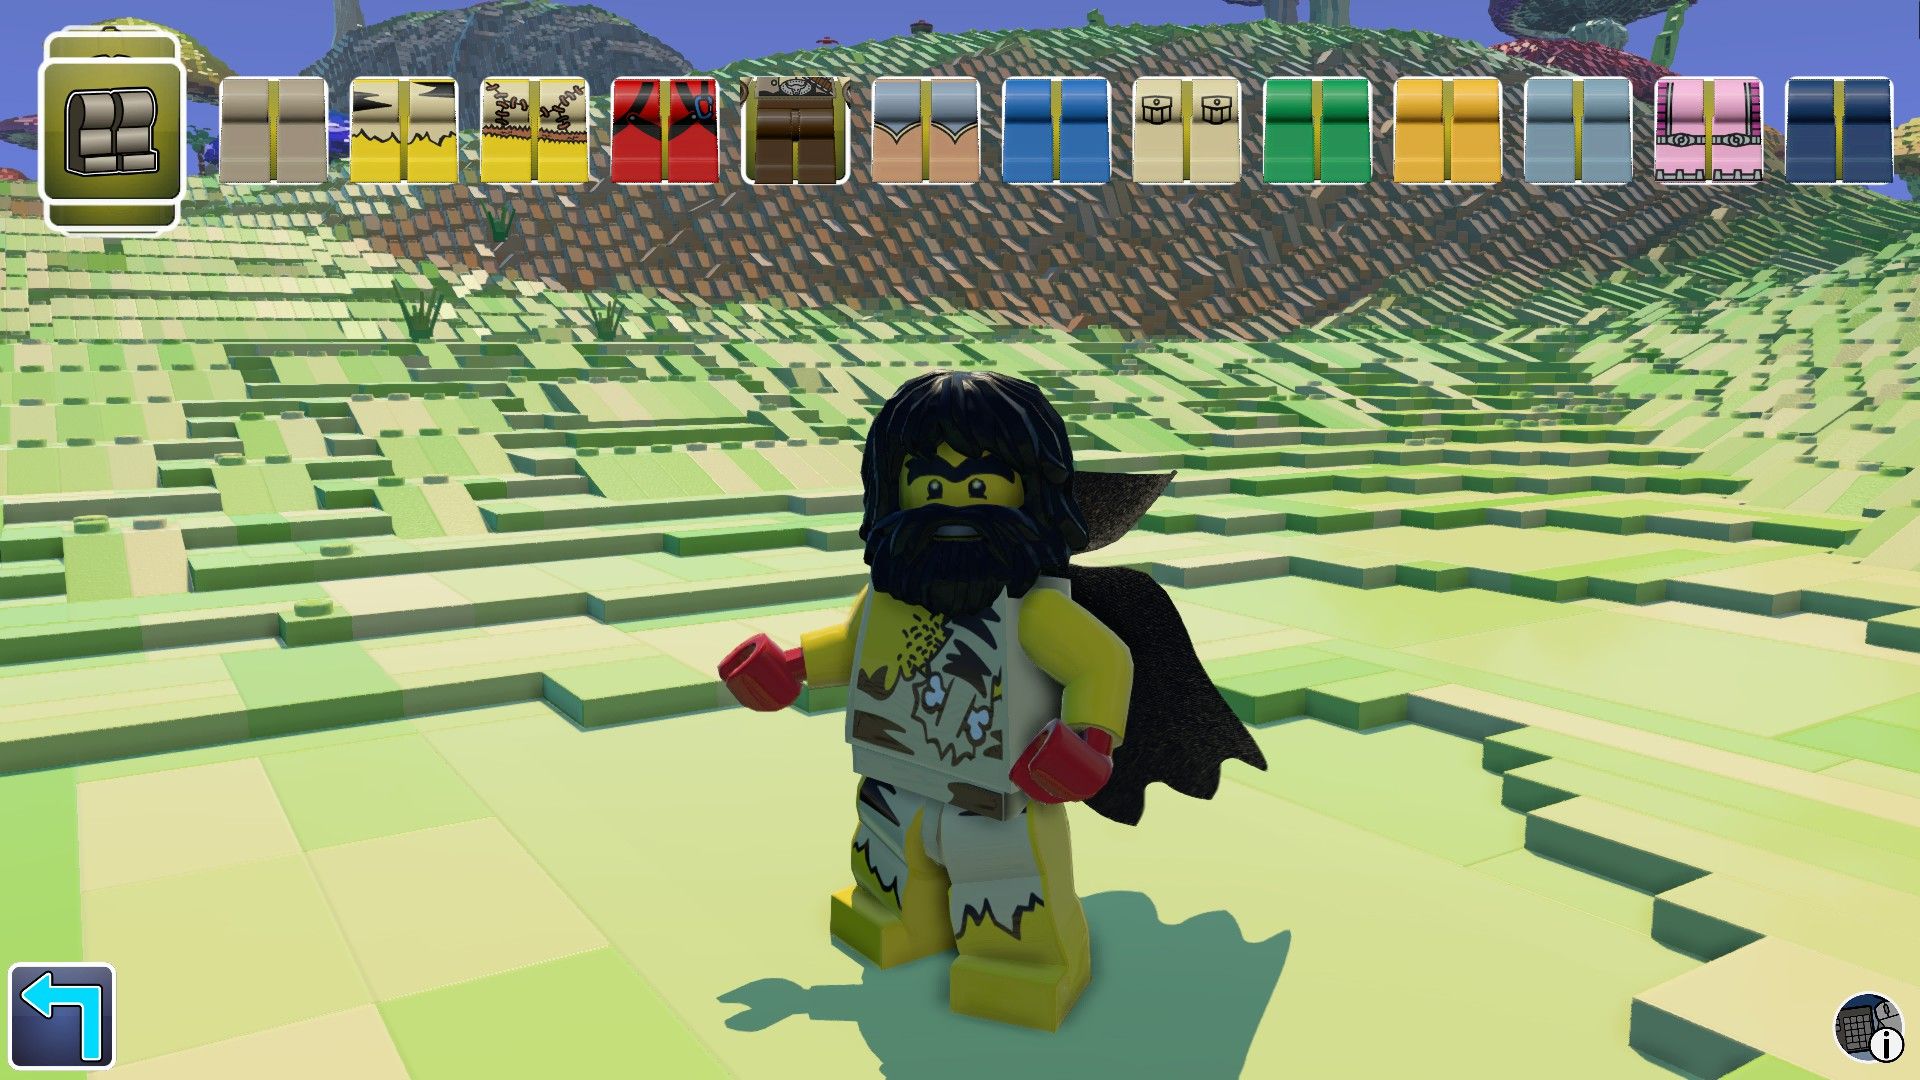 LEGO Worlds officially announced, is Minecraft with LEGO